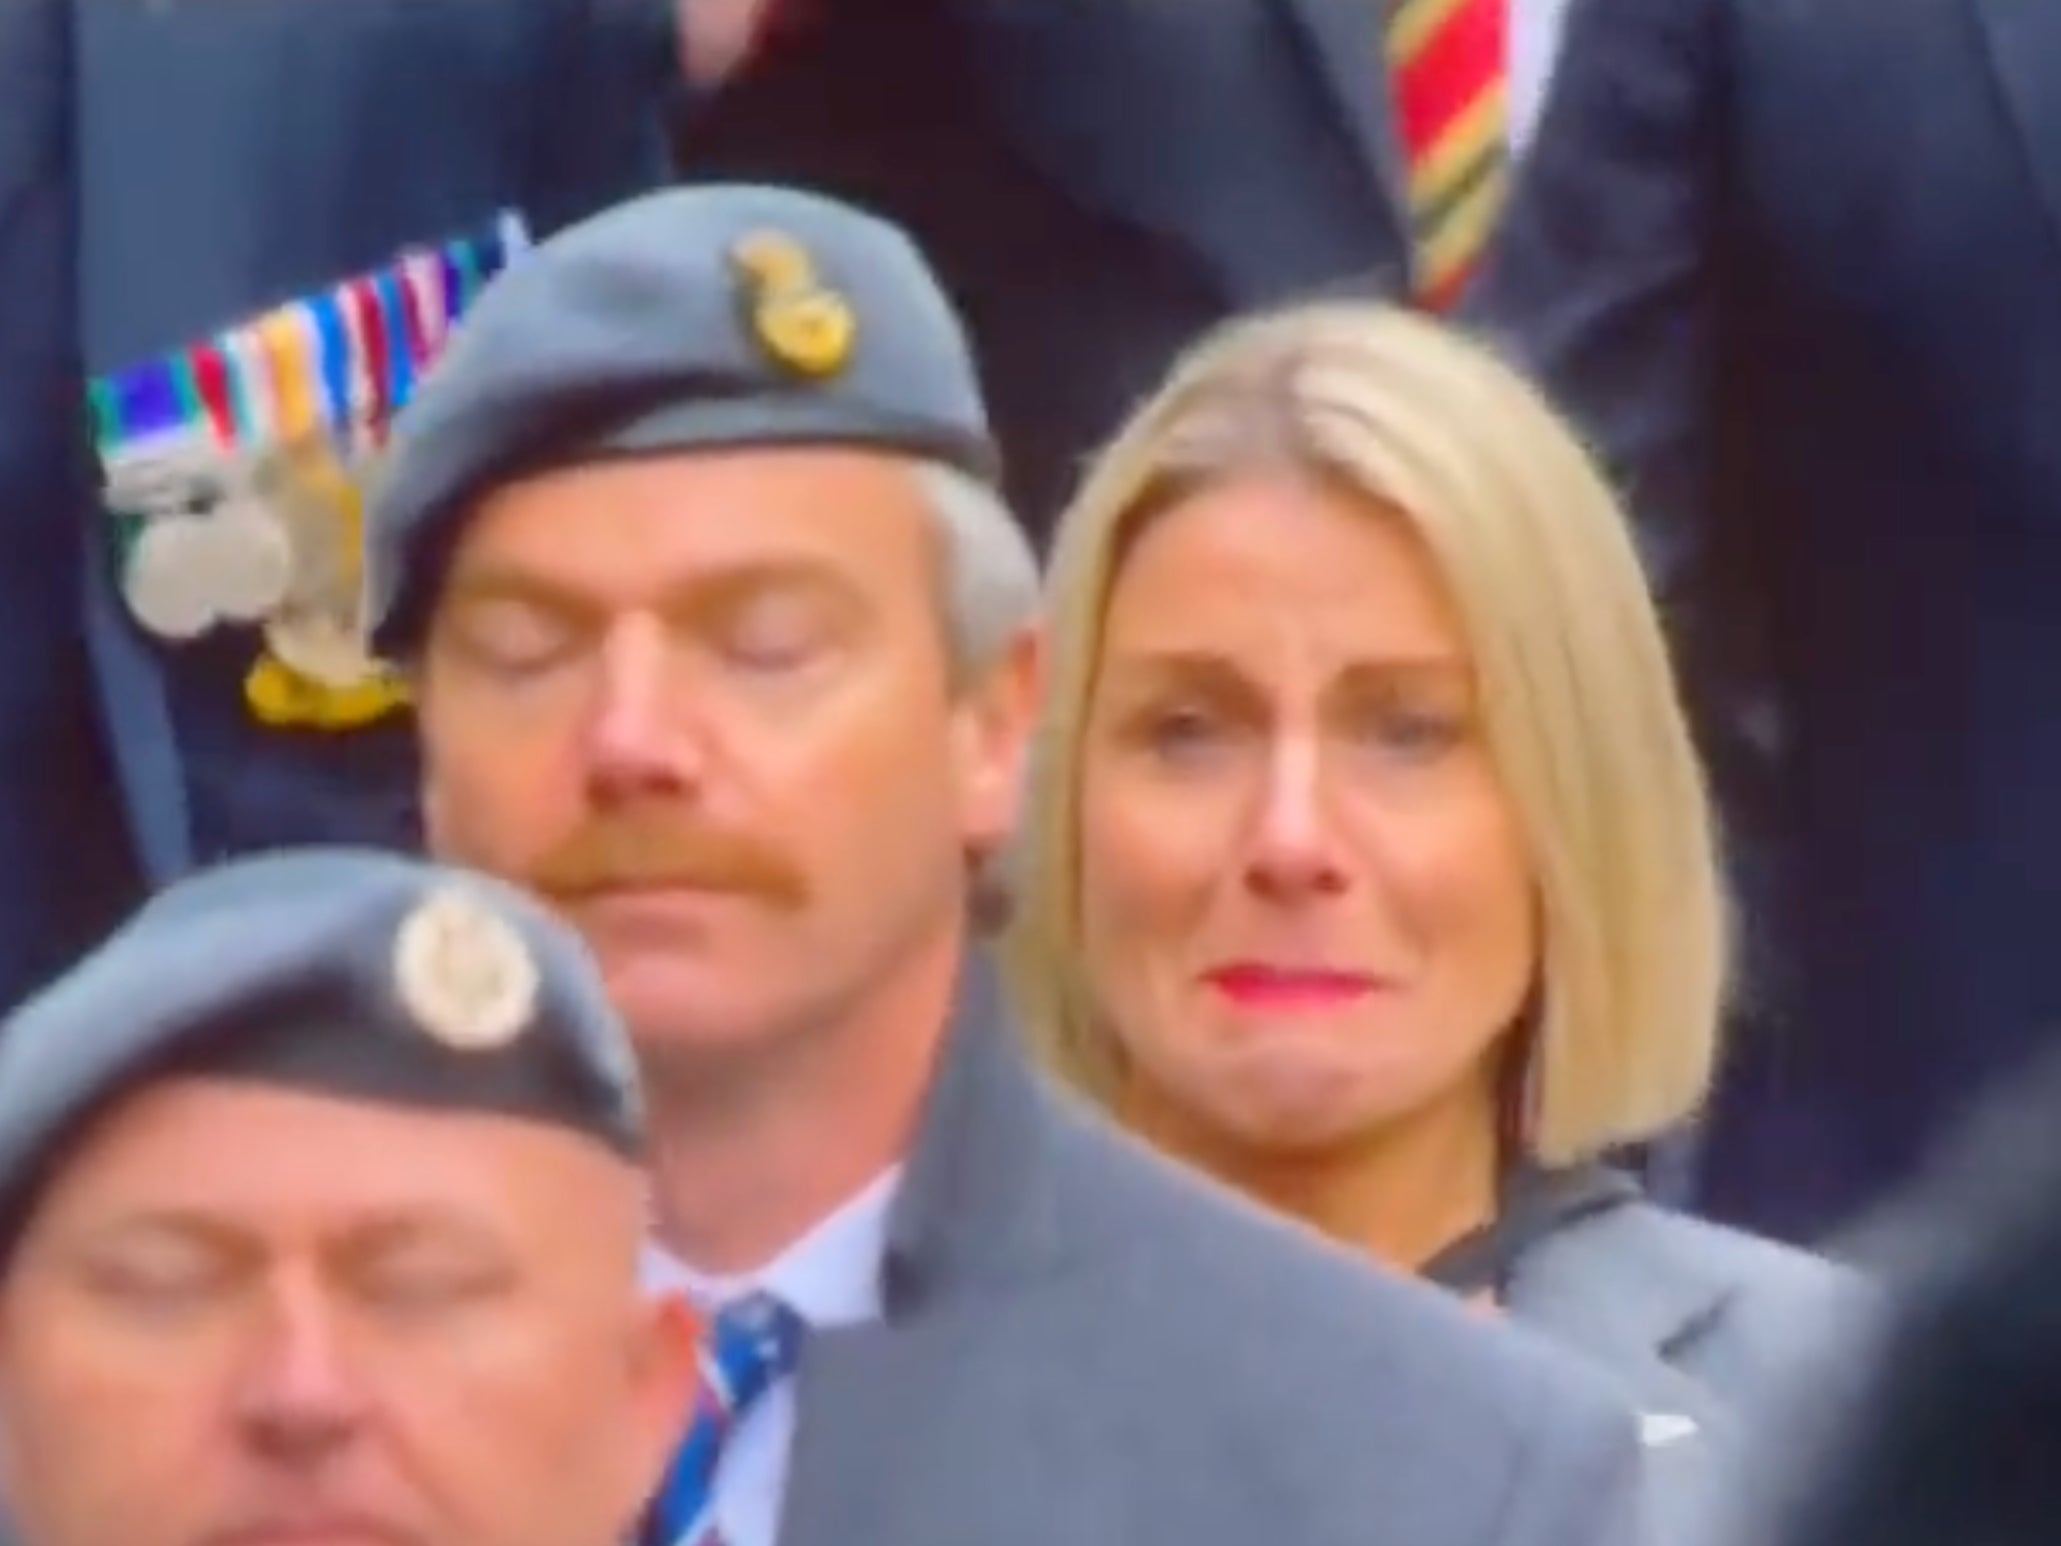 Liz McConaghy broke down in tears at last year’s service